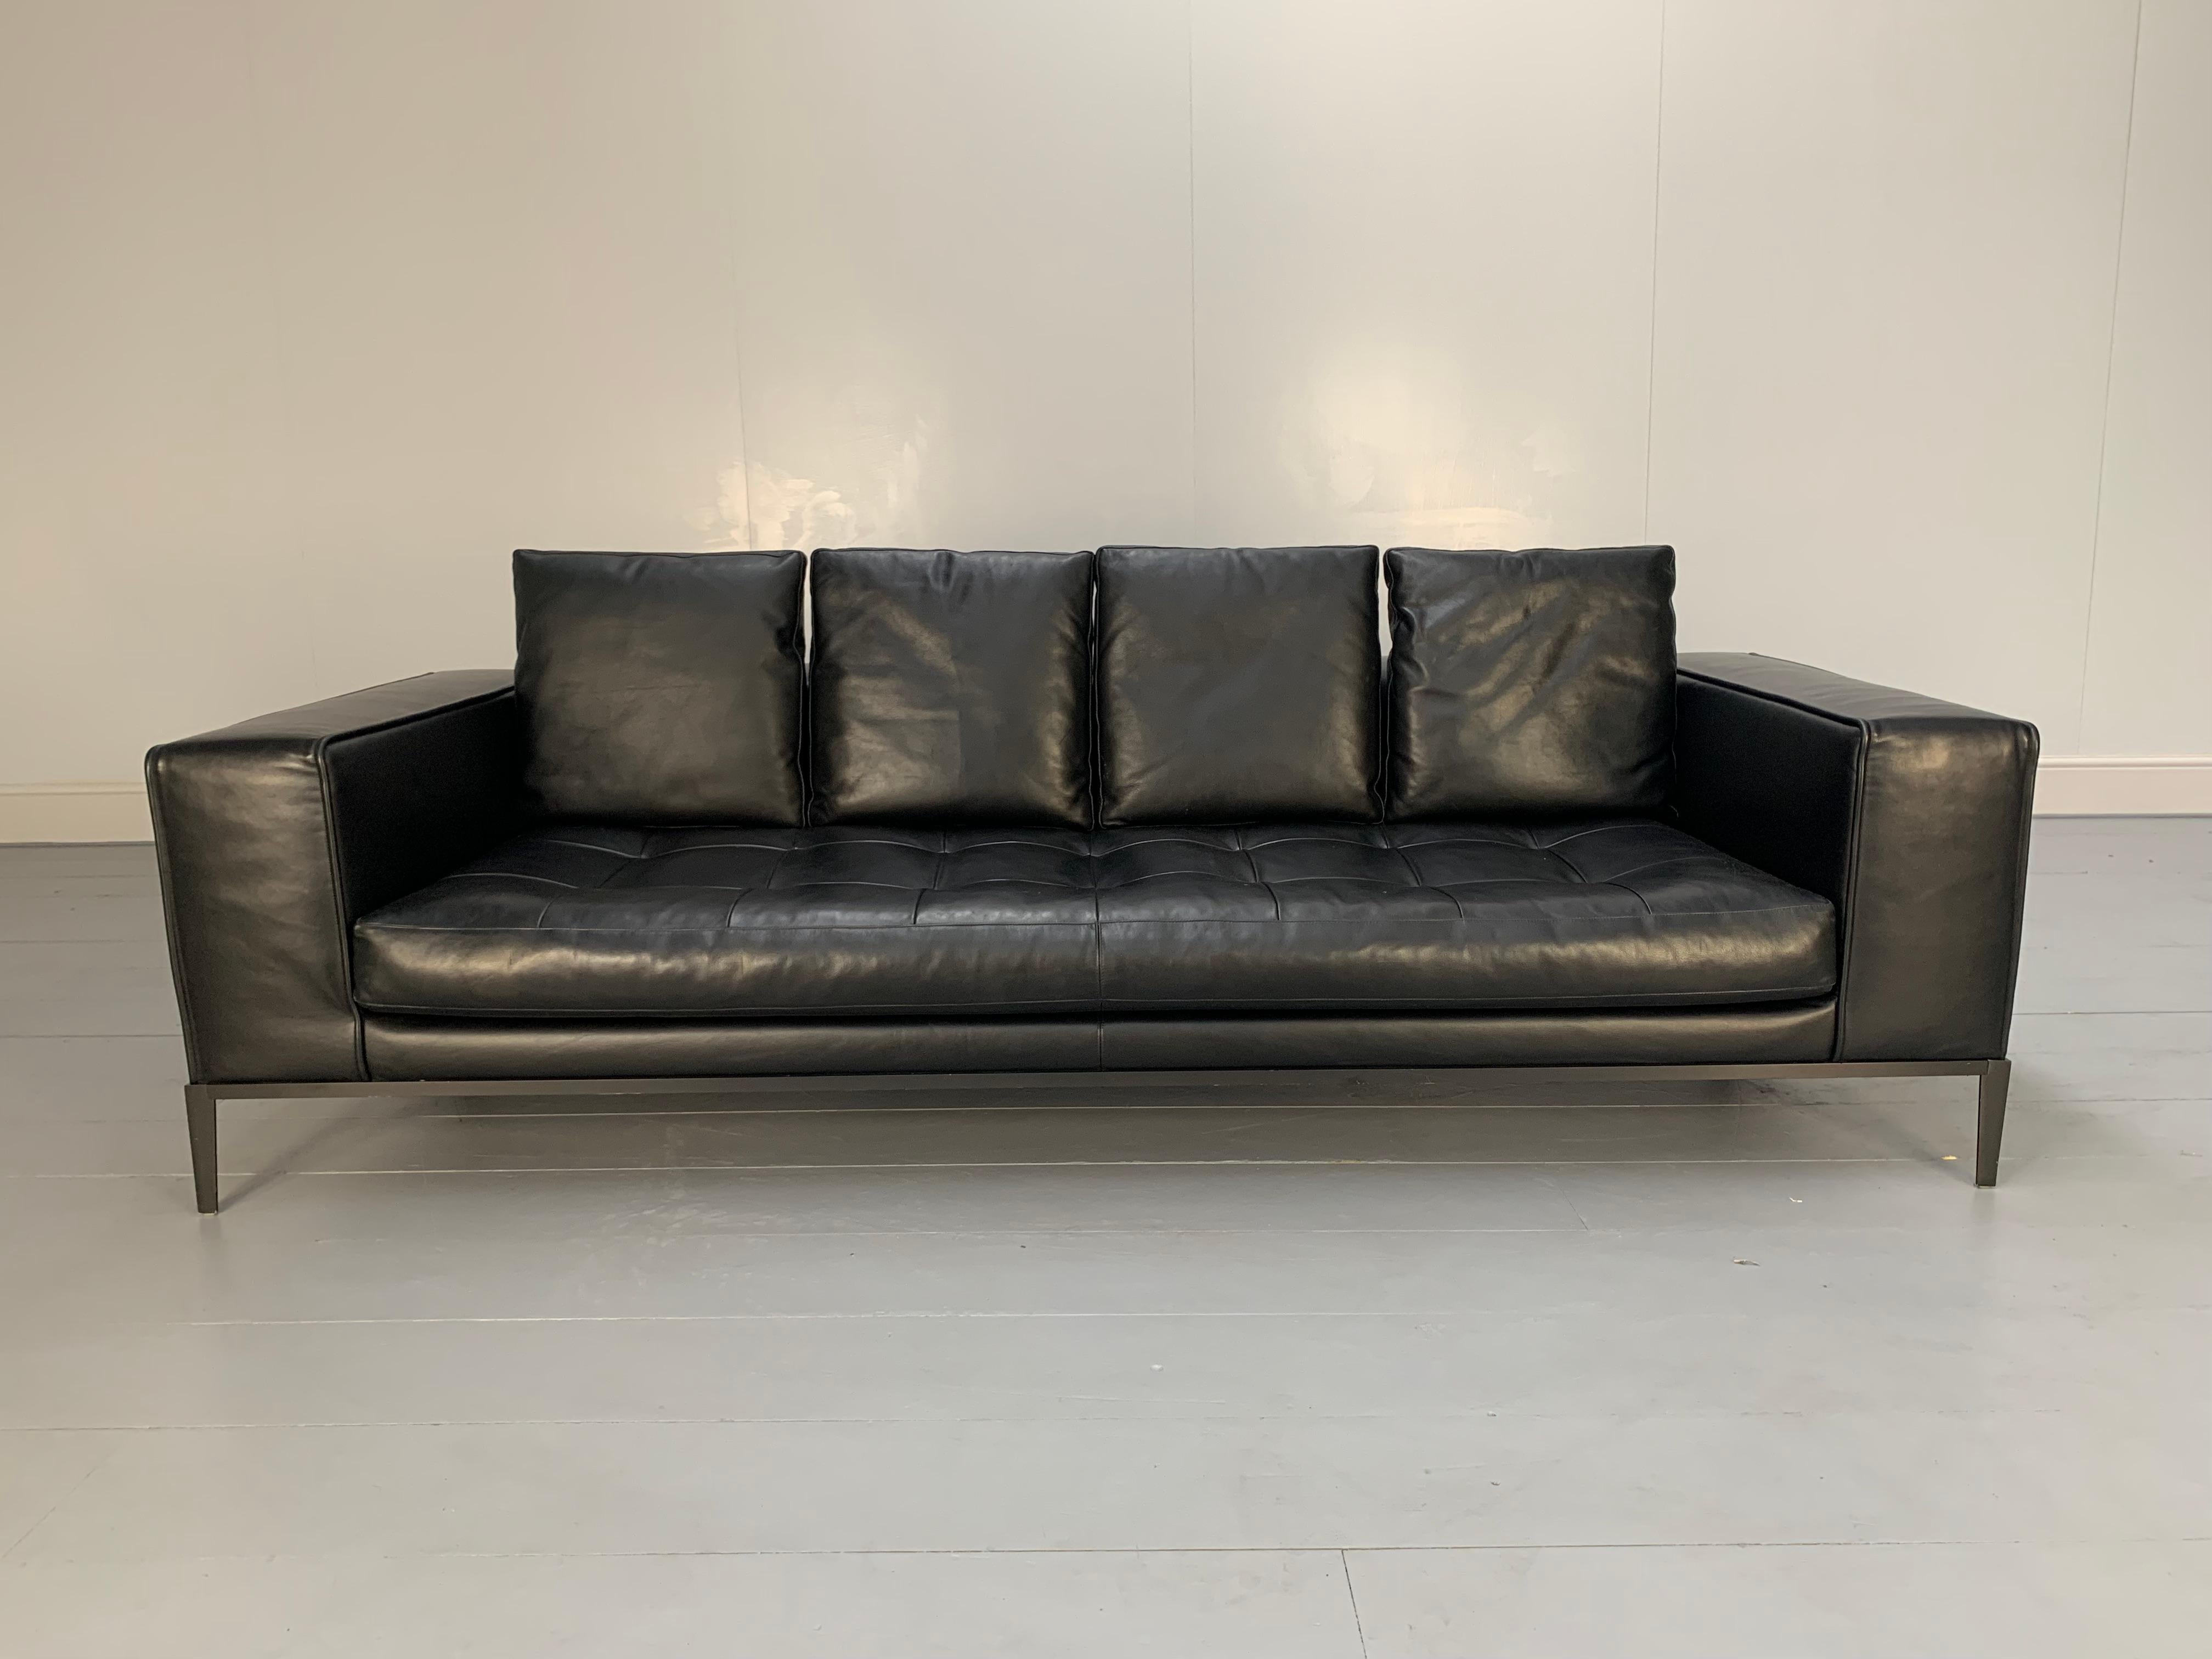 This is a superb “Simplex 8SMD242_1” Large 4-Seat Sofa from the “Maxalto” range of seating from the world renown Italian furniture house of B&B Italia.

In a world of temporary pleasures, B&B Italia create beautiful furniture that remains a joy